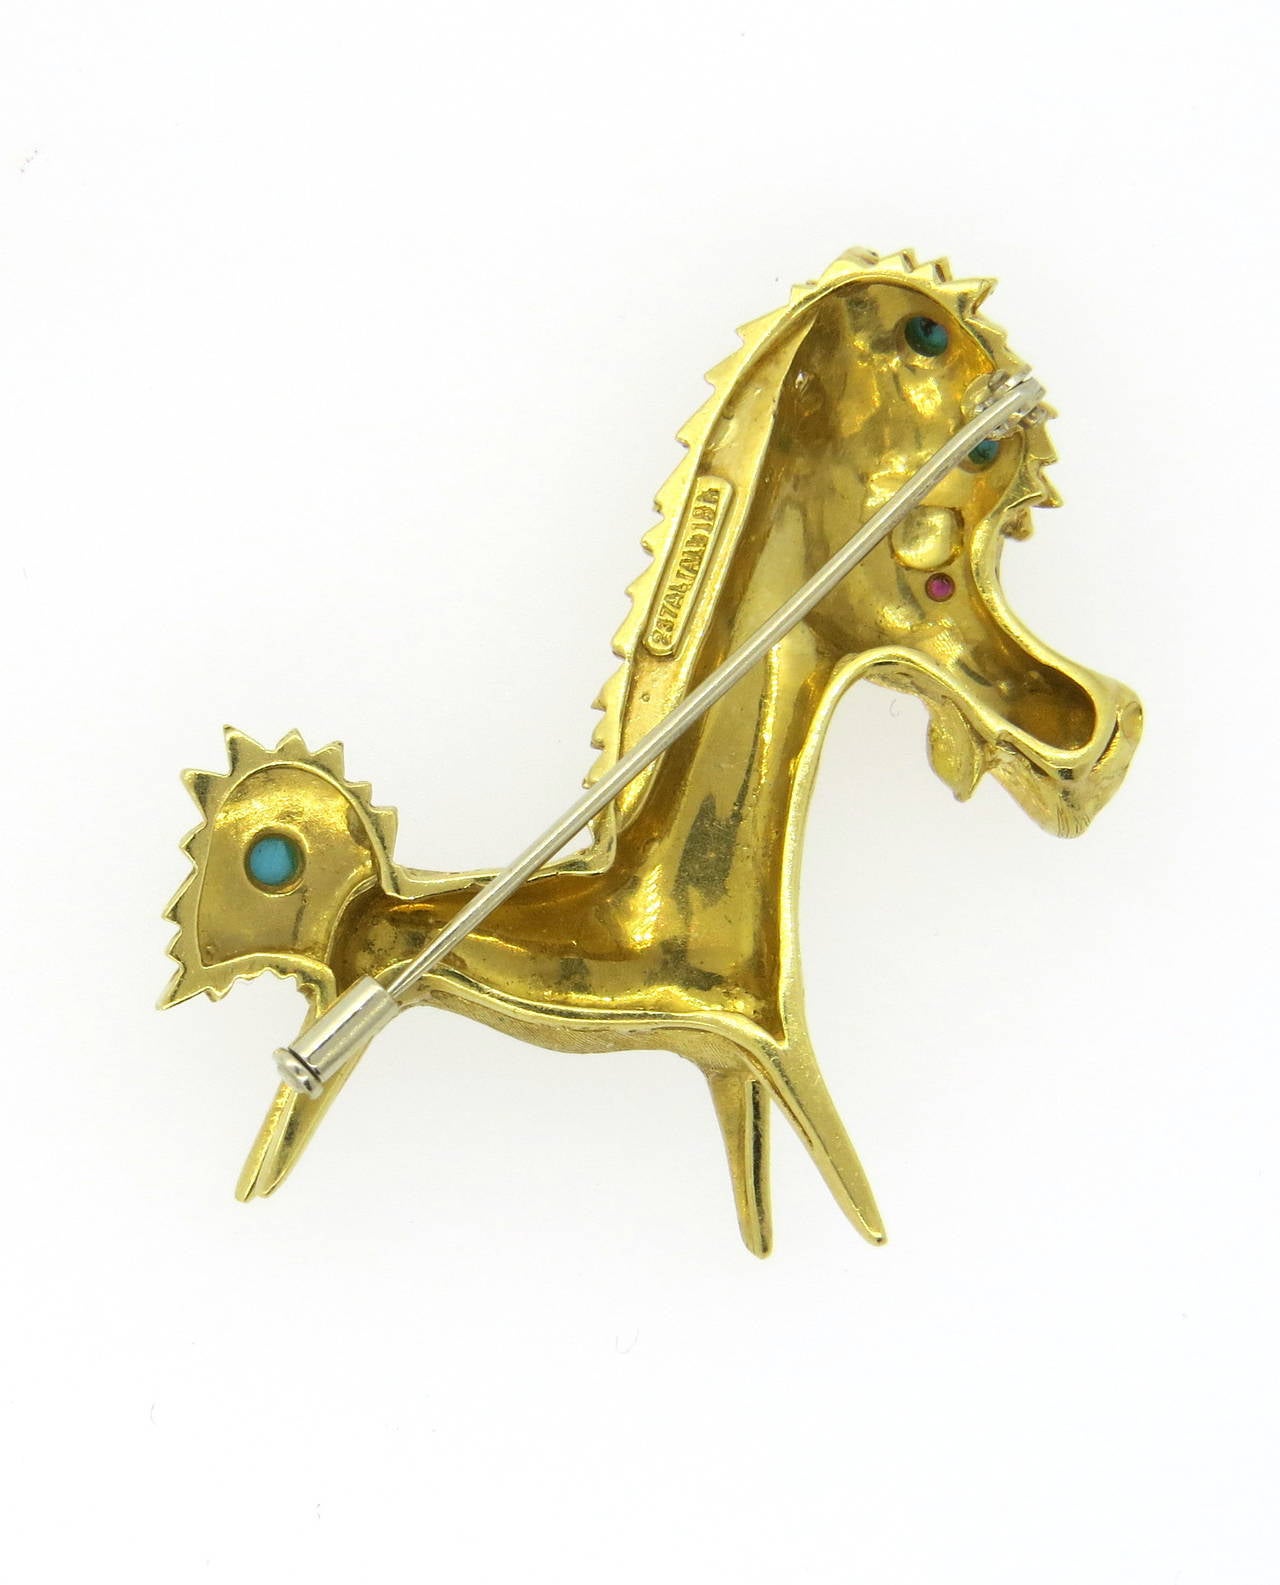 An 18k yellow gold brooch depicting a donkey, set with a ruby eye and turquoise cabochons.  The brooch measures 45mm x 45mm and weighs 15.7 grams. Marked: 237AL, Italy, 18k.